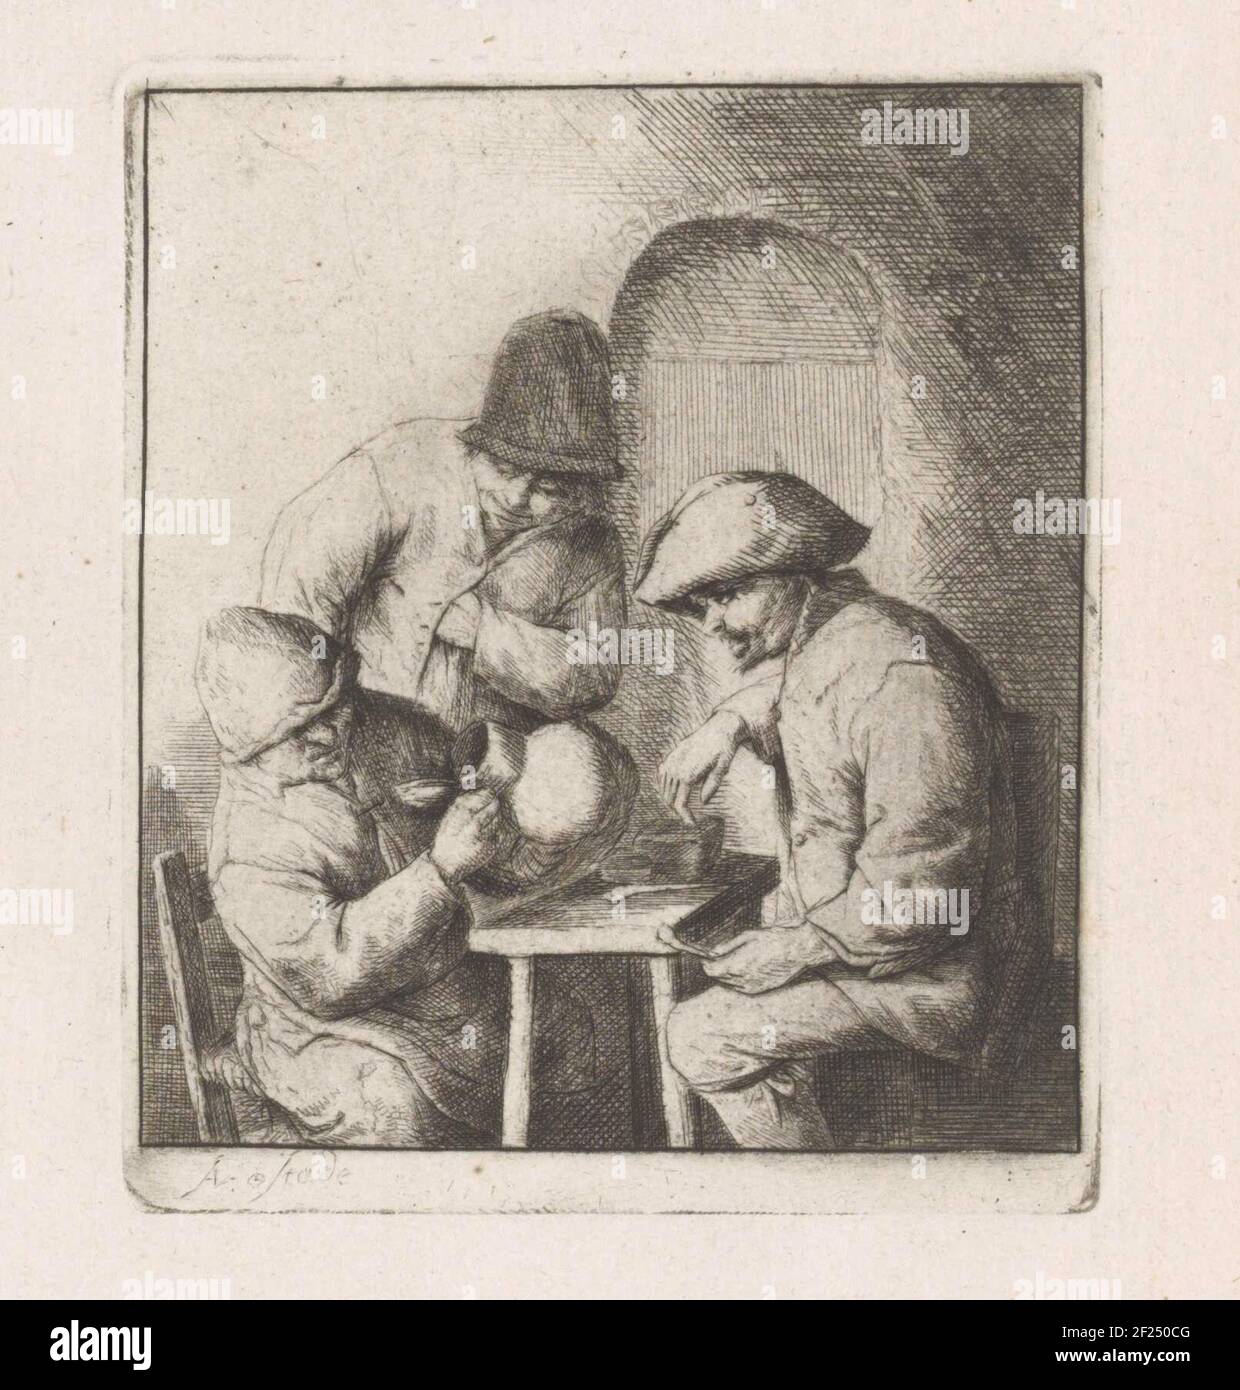 Drie mannen met een lege kruik.The man who looks into the empty jug may be refers to a 'juggens viewer' or drunk. The gesture of the standing man behind him, a hand in his shirt, was associated with laziness. This print is part of an album. Stock Photo